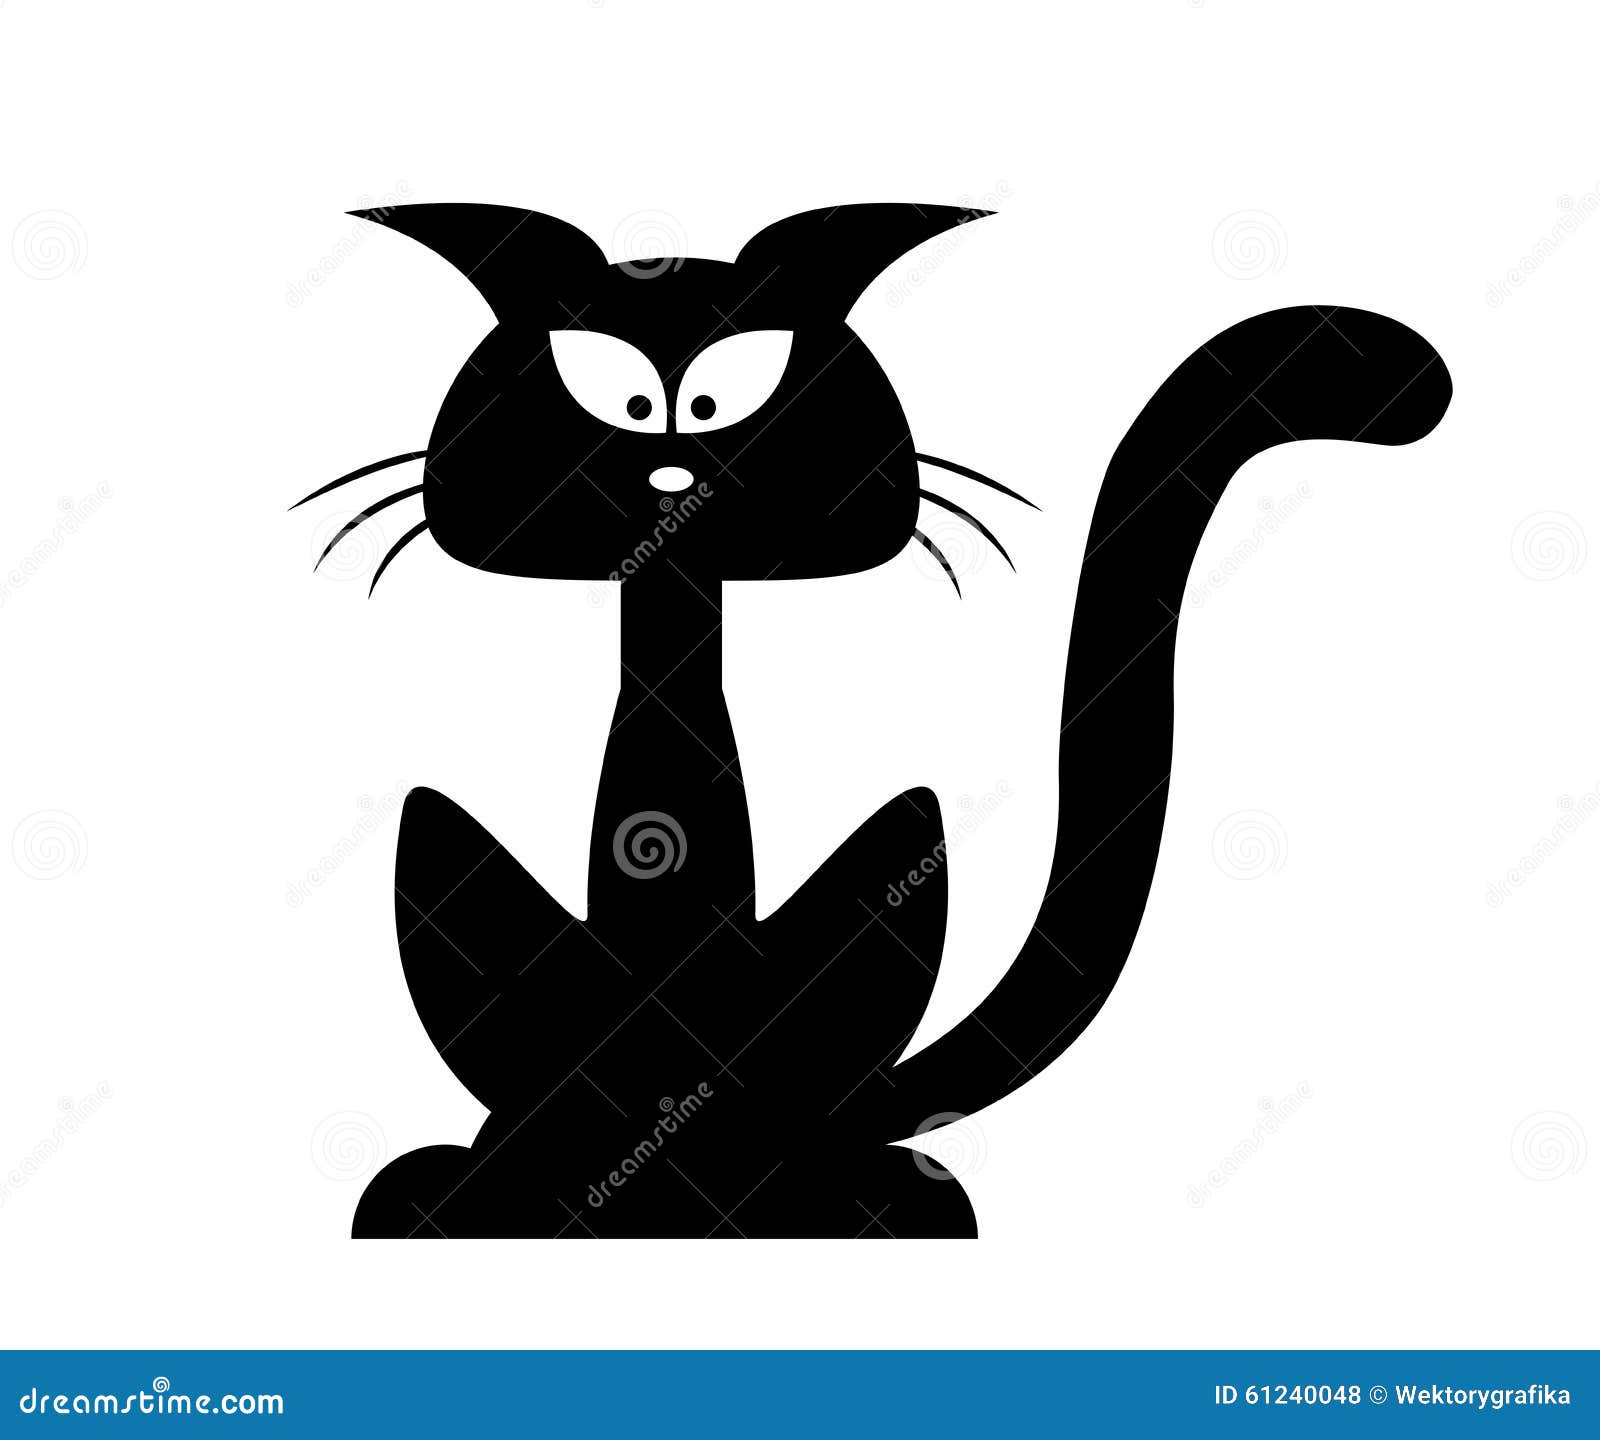 Angry black cat face clipart isolated on white. Cartoon style